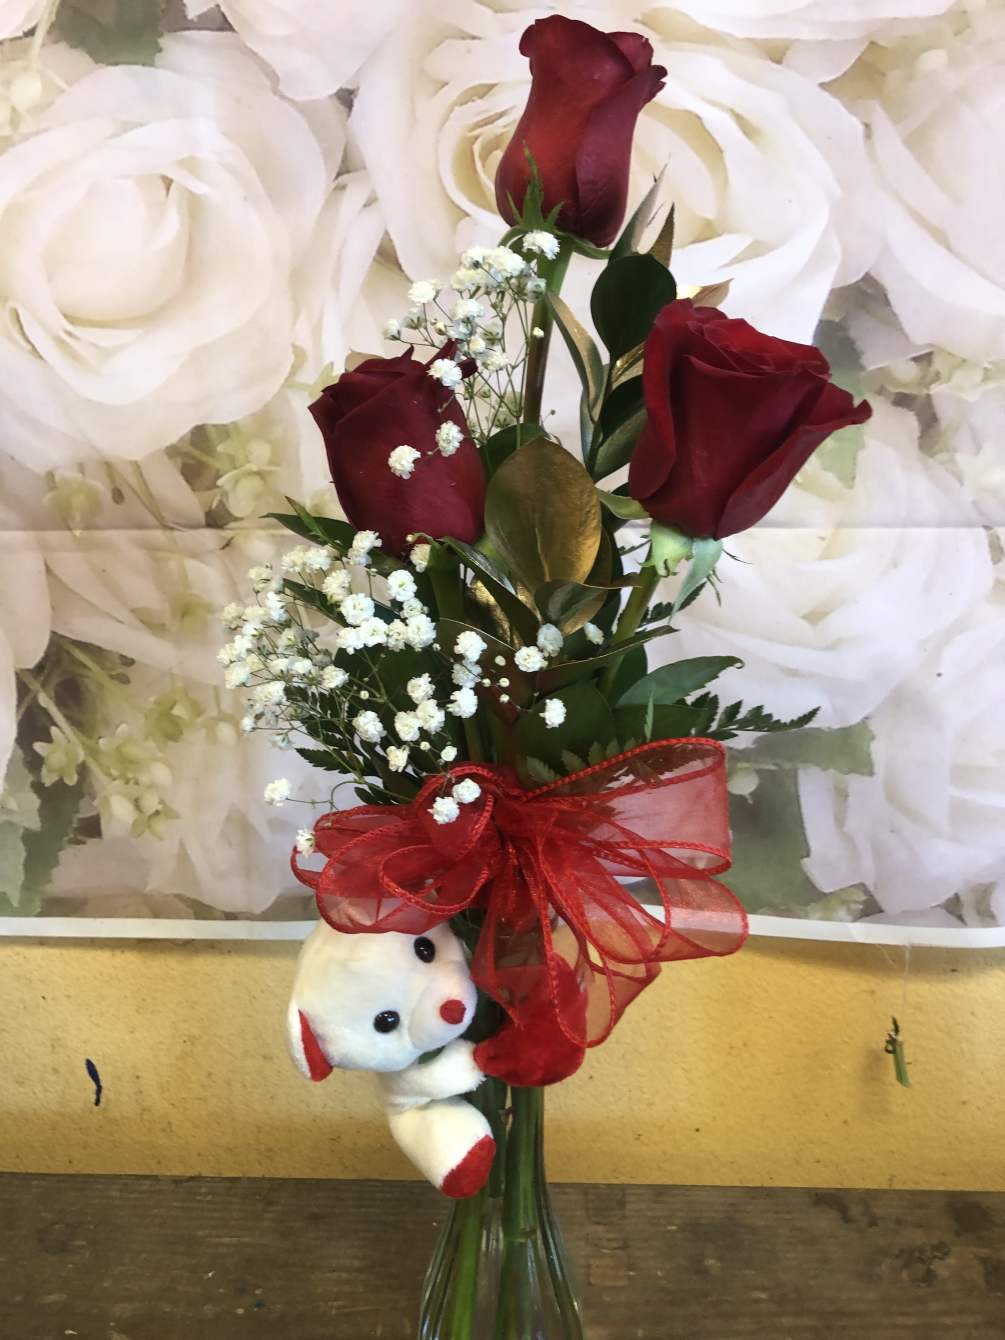 3 Roses in a vase and a bear is hugging the vase